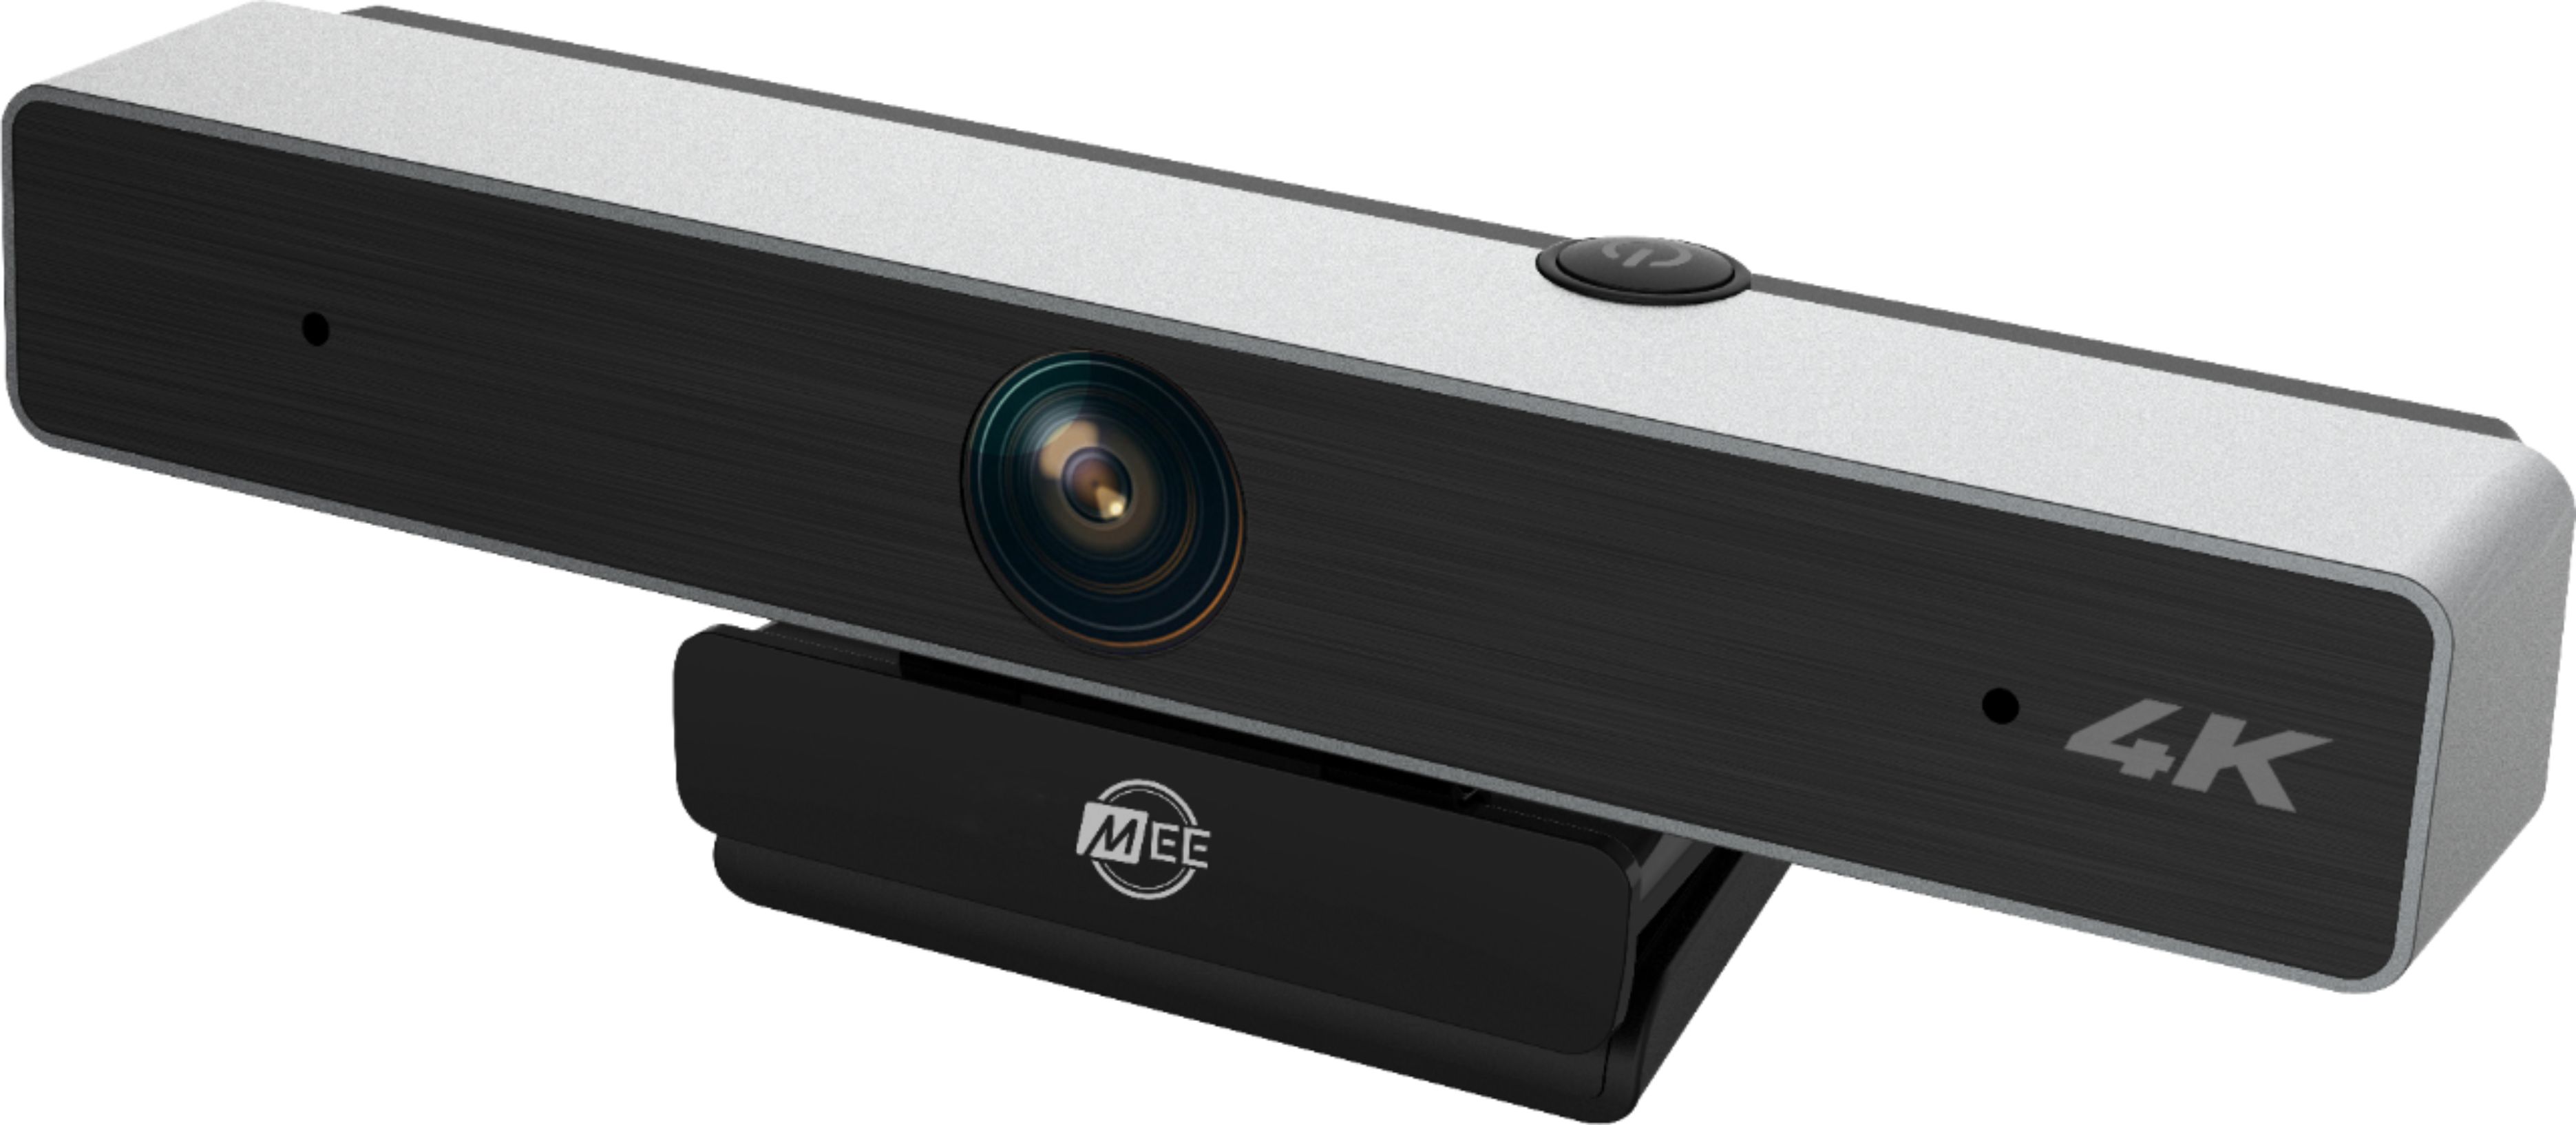 Angle View: MEE audio - 3840 x 2160 Webcam with 4x Zoom and ANC Microphone